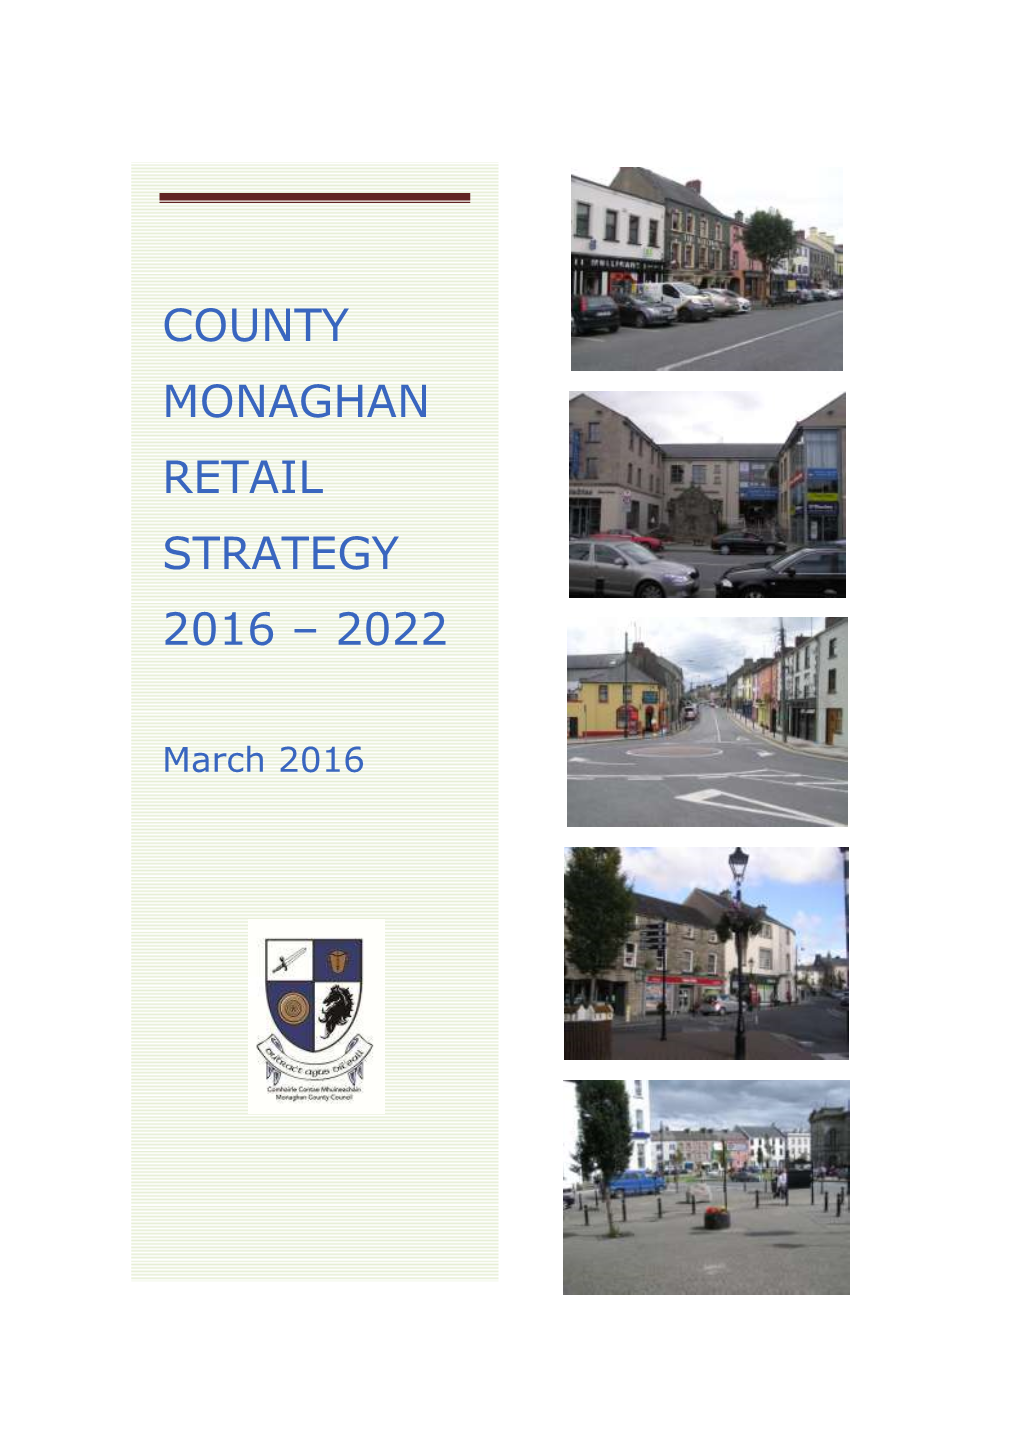 County Monaghan Retail Strategy 2016-2022